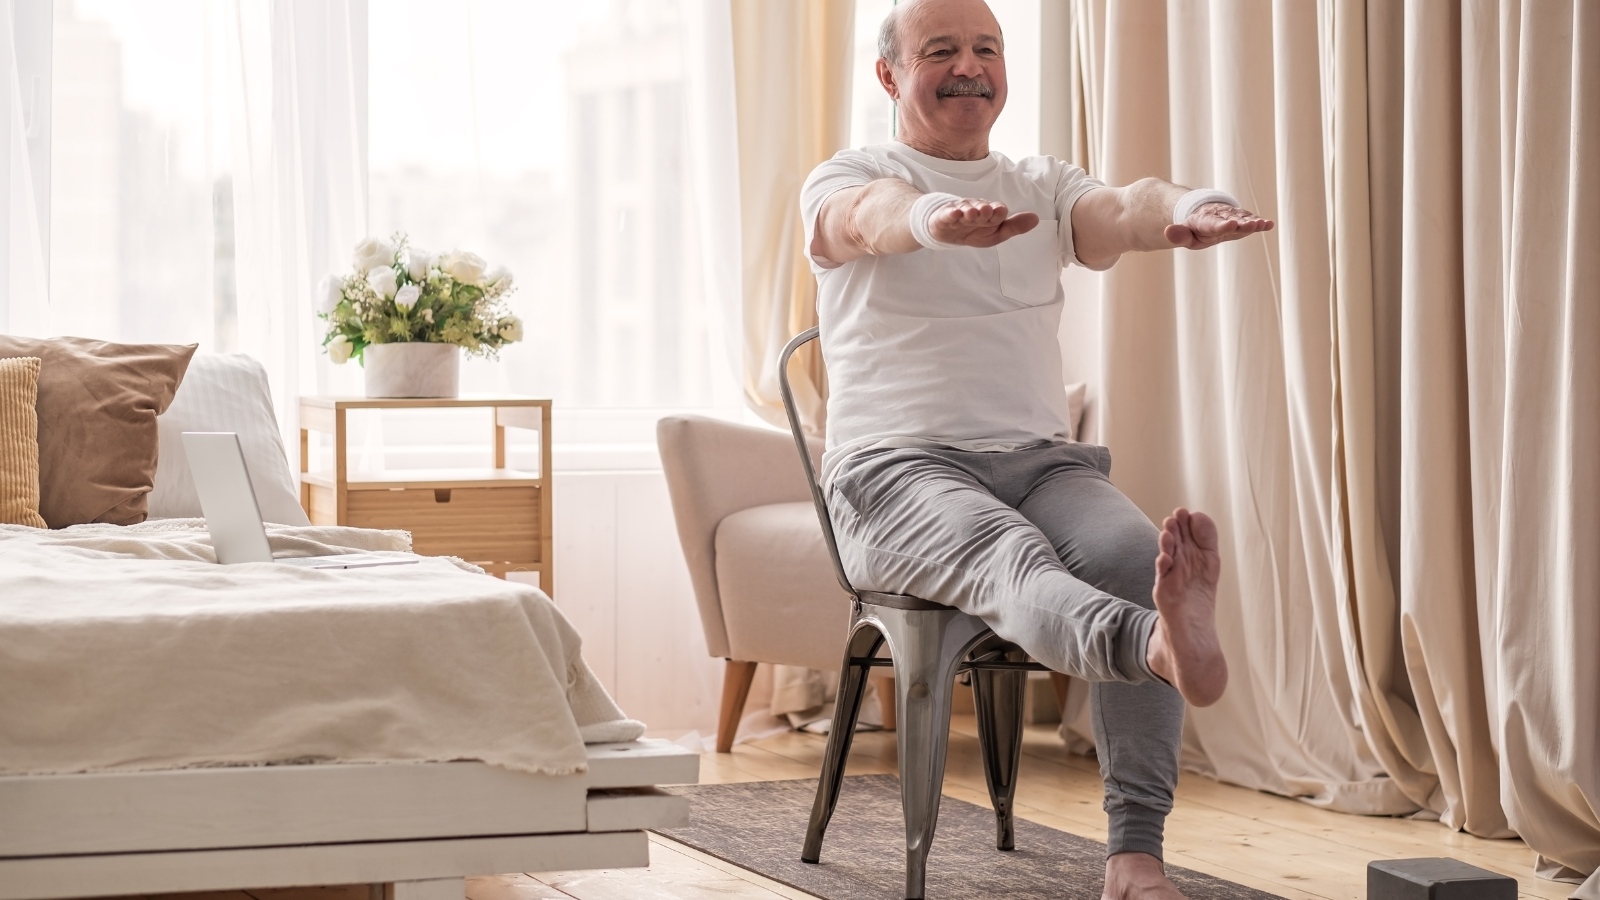 Mature man practicing chair yoga asana for legs and hands. His positive mood and reduced stress showing on his expression.